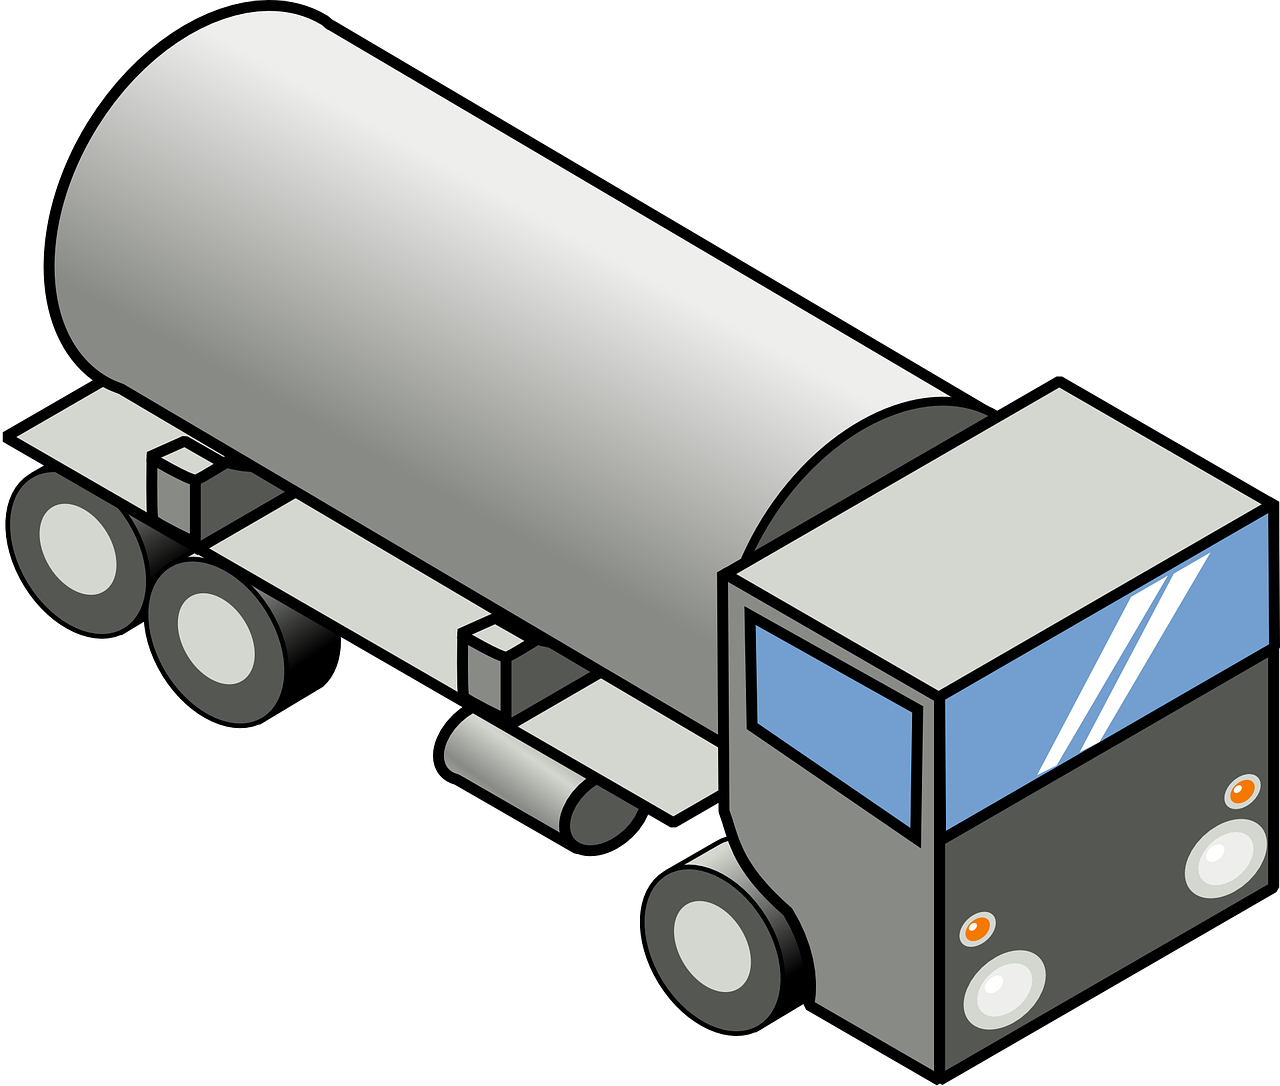 truck,trailer,fuel,tanker,freight,cargo,industry,delivery,shipping,semi,shipment,tractor,industrial,driving,haul,load,logistic,deliver,motion,rig,traffic,commercial,auto,diesel,shipper,free vector graphics,free pictures, free photos, free images, royalty free, free illustrations, public domain